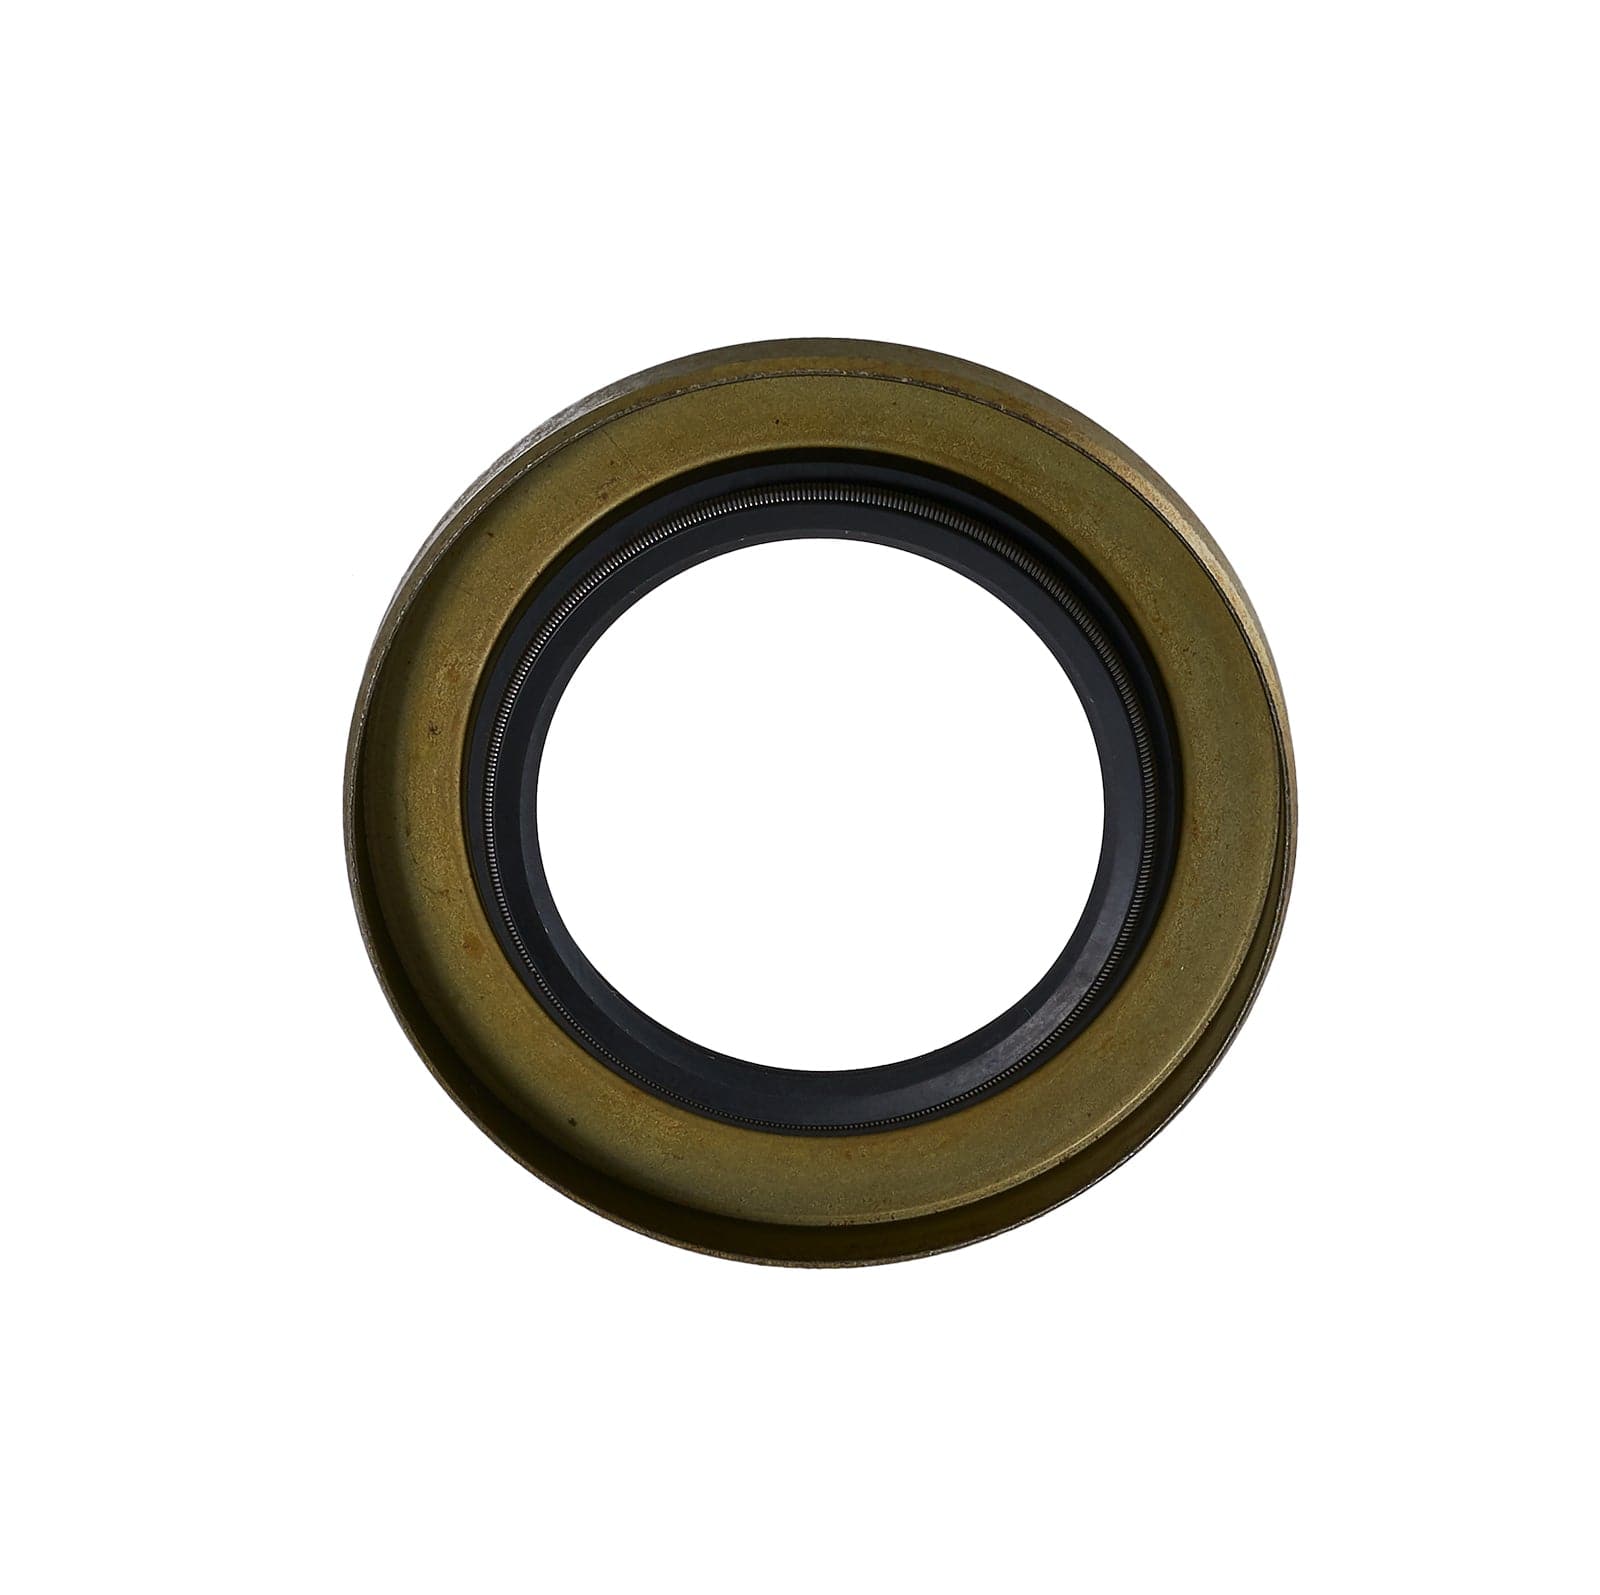 Tailer wheel hub seal for 1 1/4" spindle